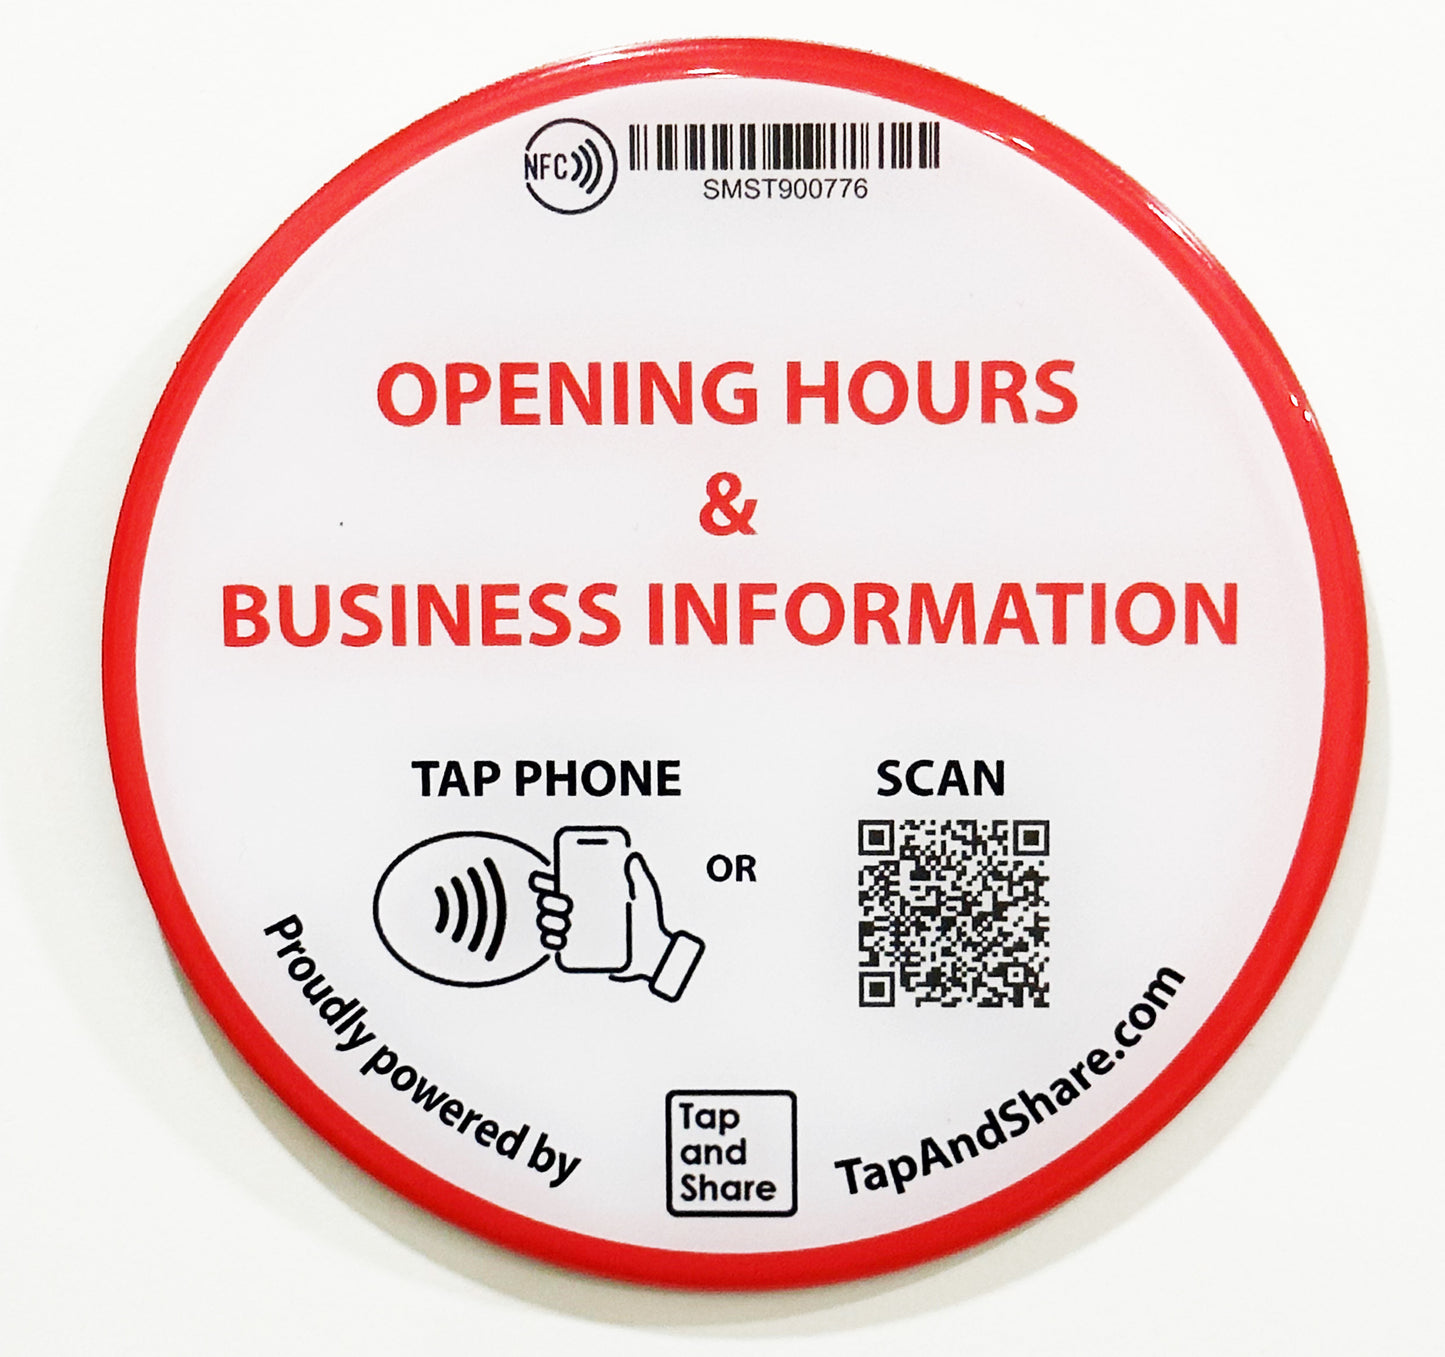 Tap and Share Contactless Sharing Smart NFC 'Opening Hours & Business Information' Epoxy Sticker + QR code